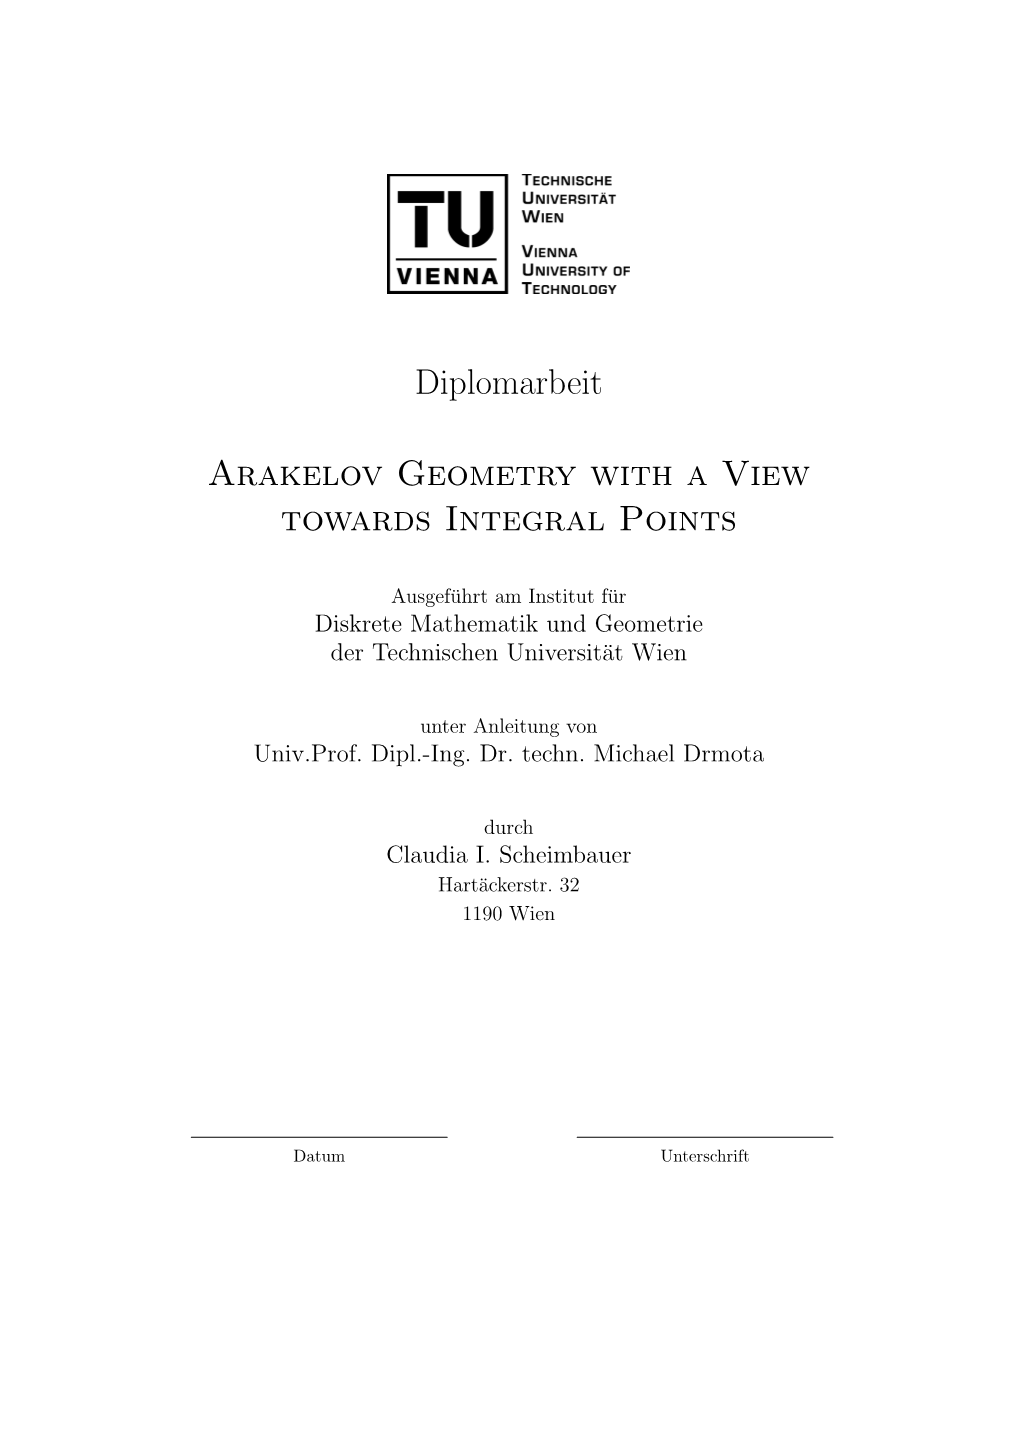 Diplomarbeit Arakelov Geometry with a View Towards Integral Points